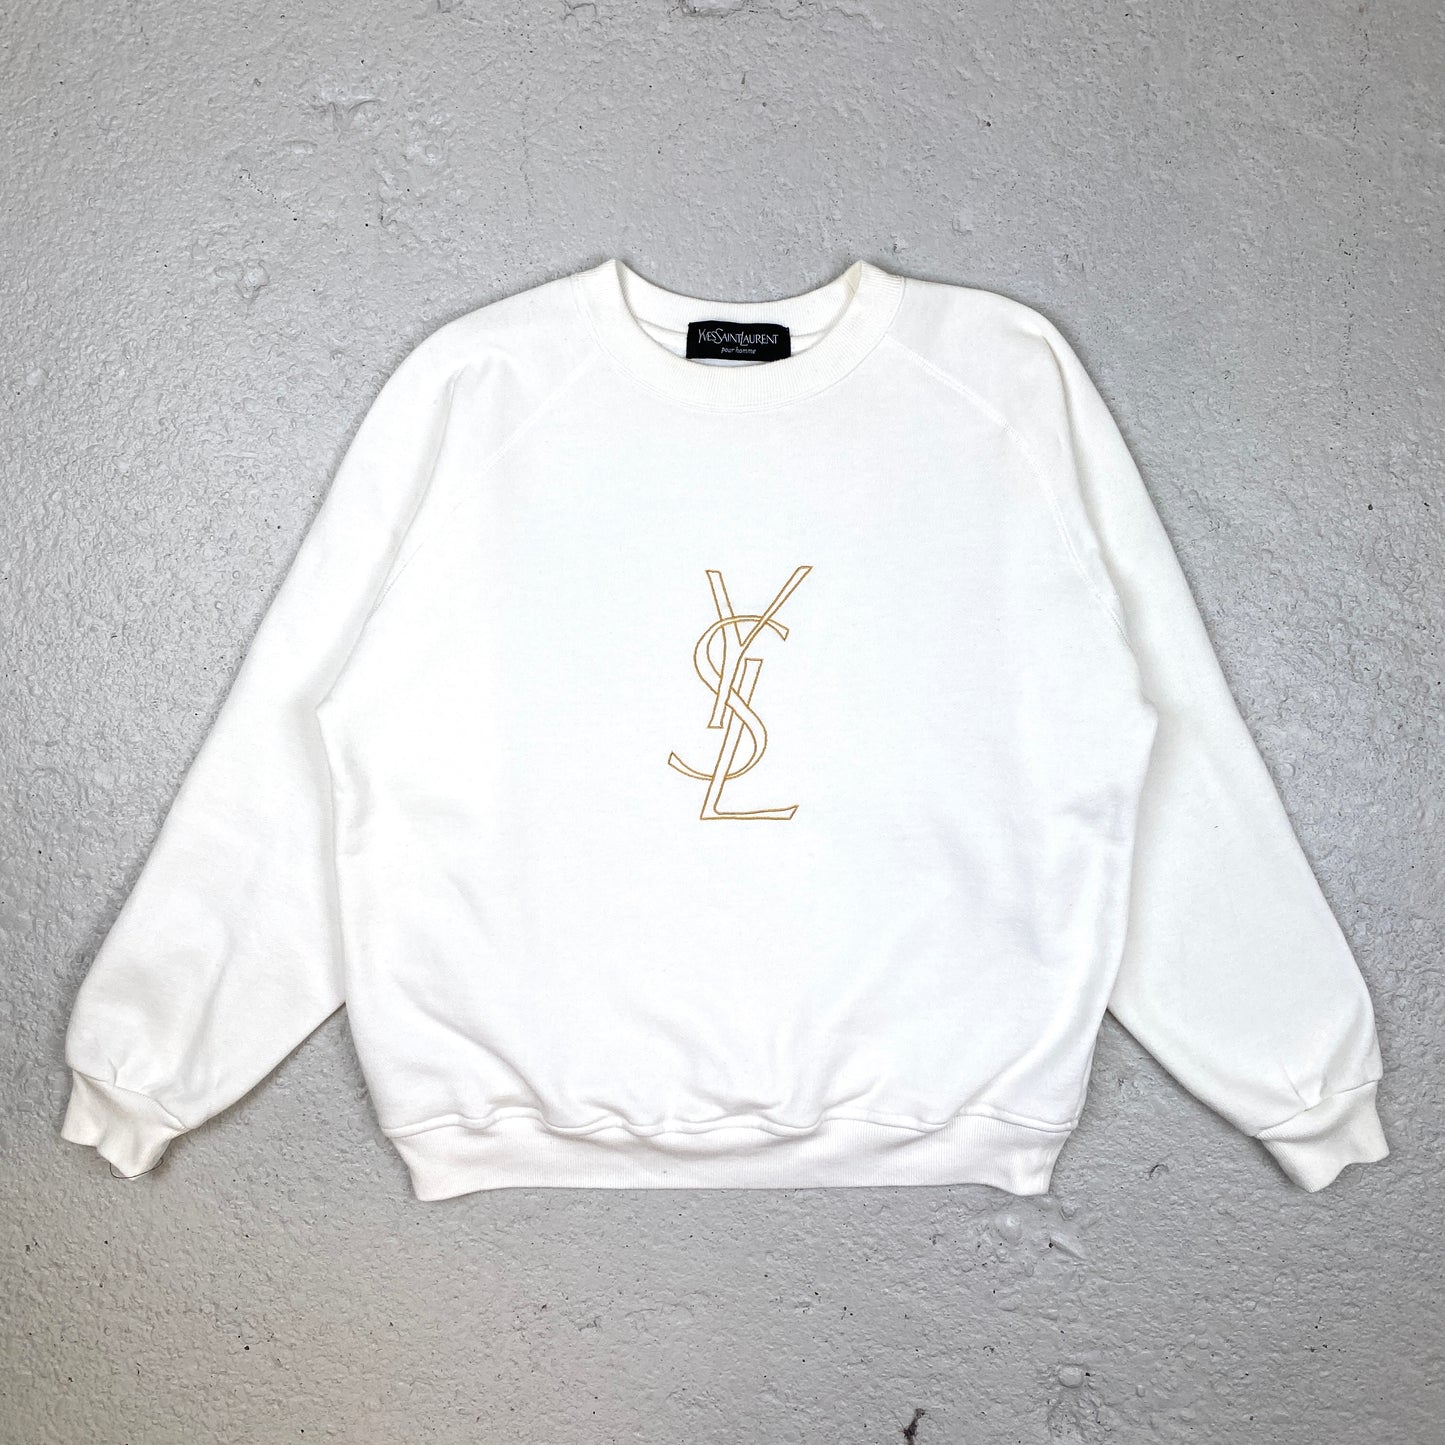 Yves Saint Laurent RARE heavyweight embroidered sweater (XS-S)